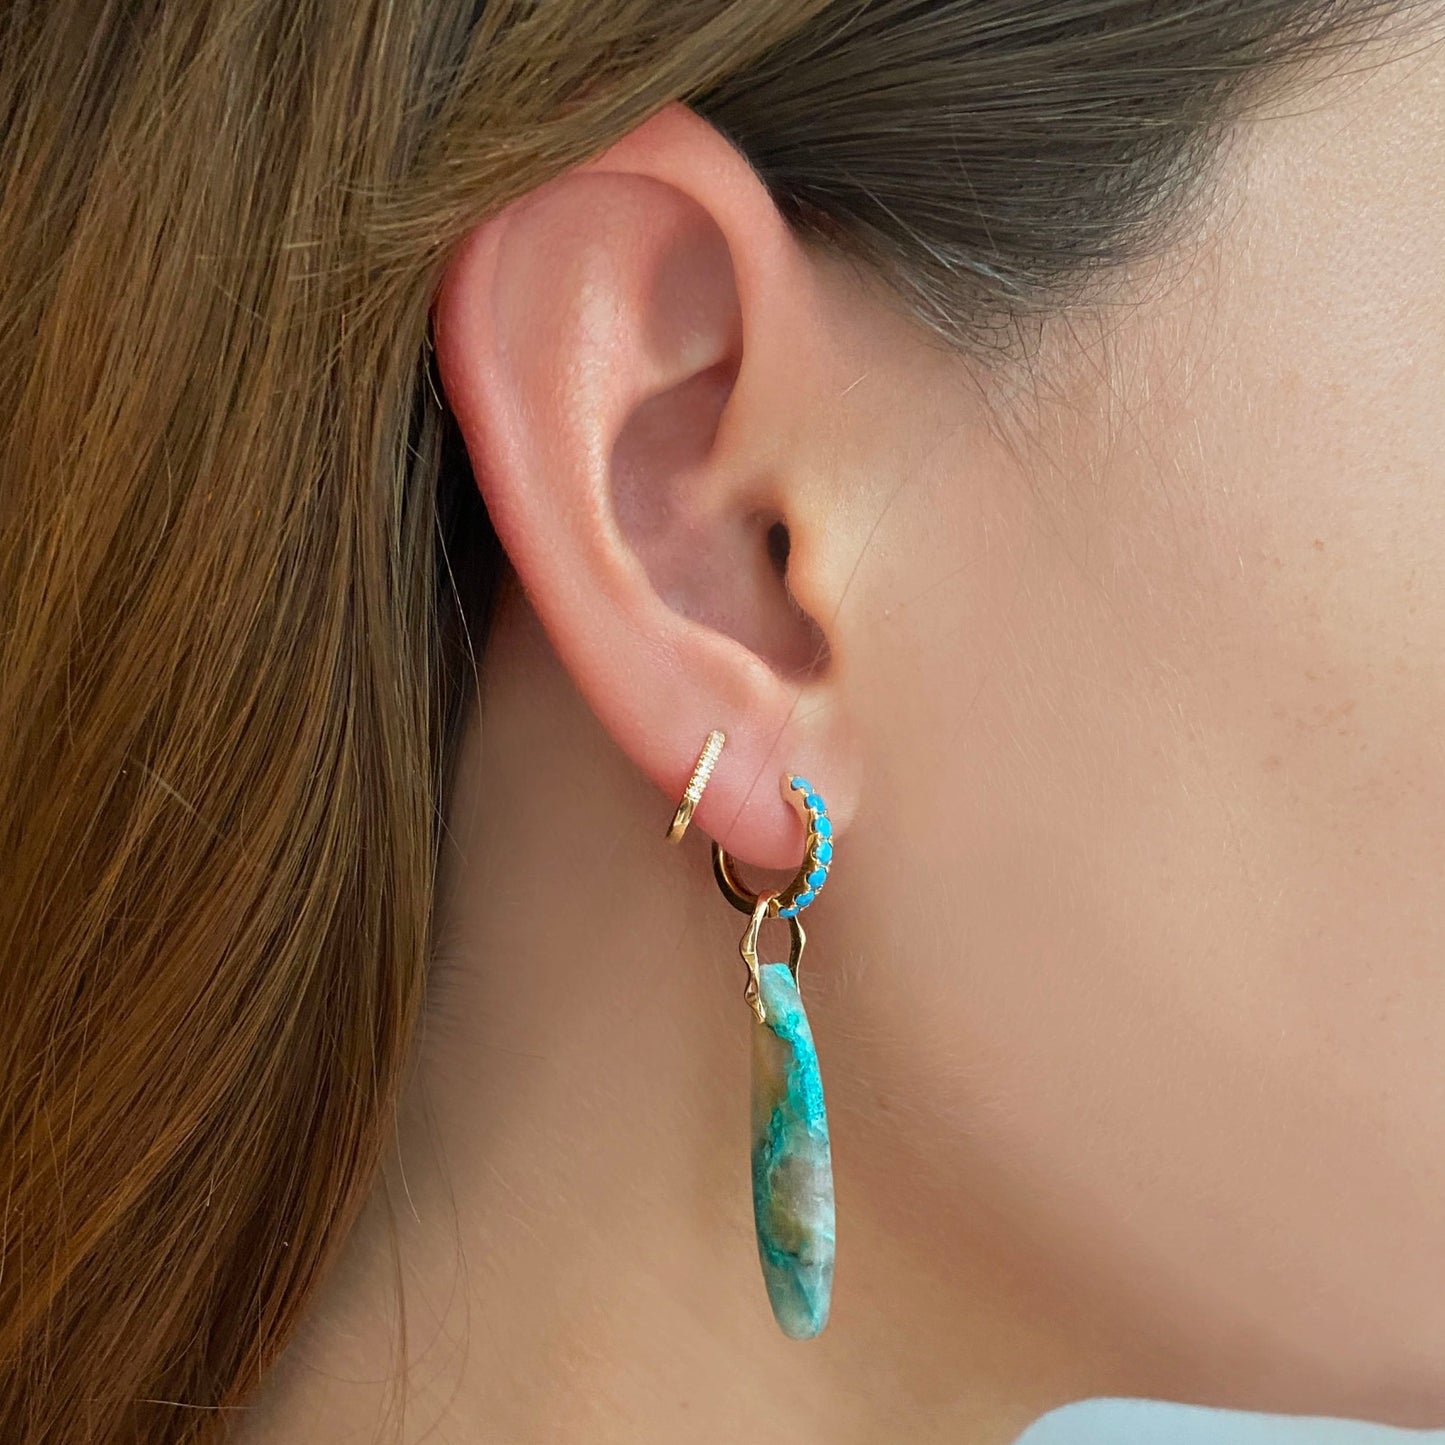 Chrysocolla in Quartz Surfboard Charm. Styled on a ear hanging from a turquoise pave hoop